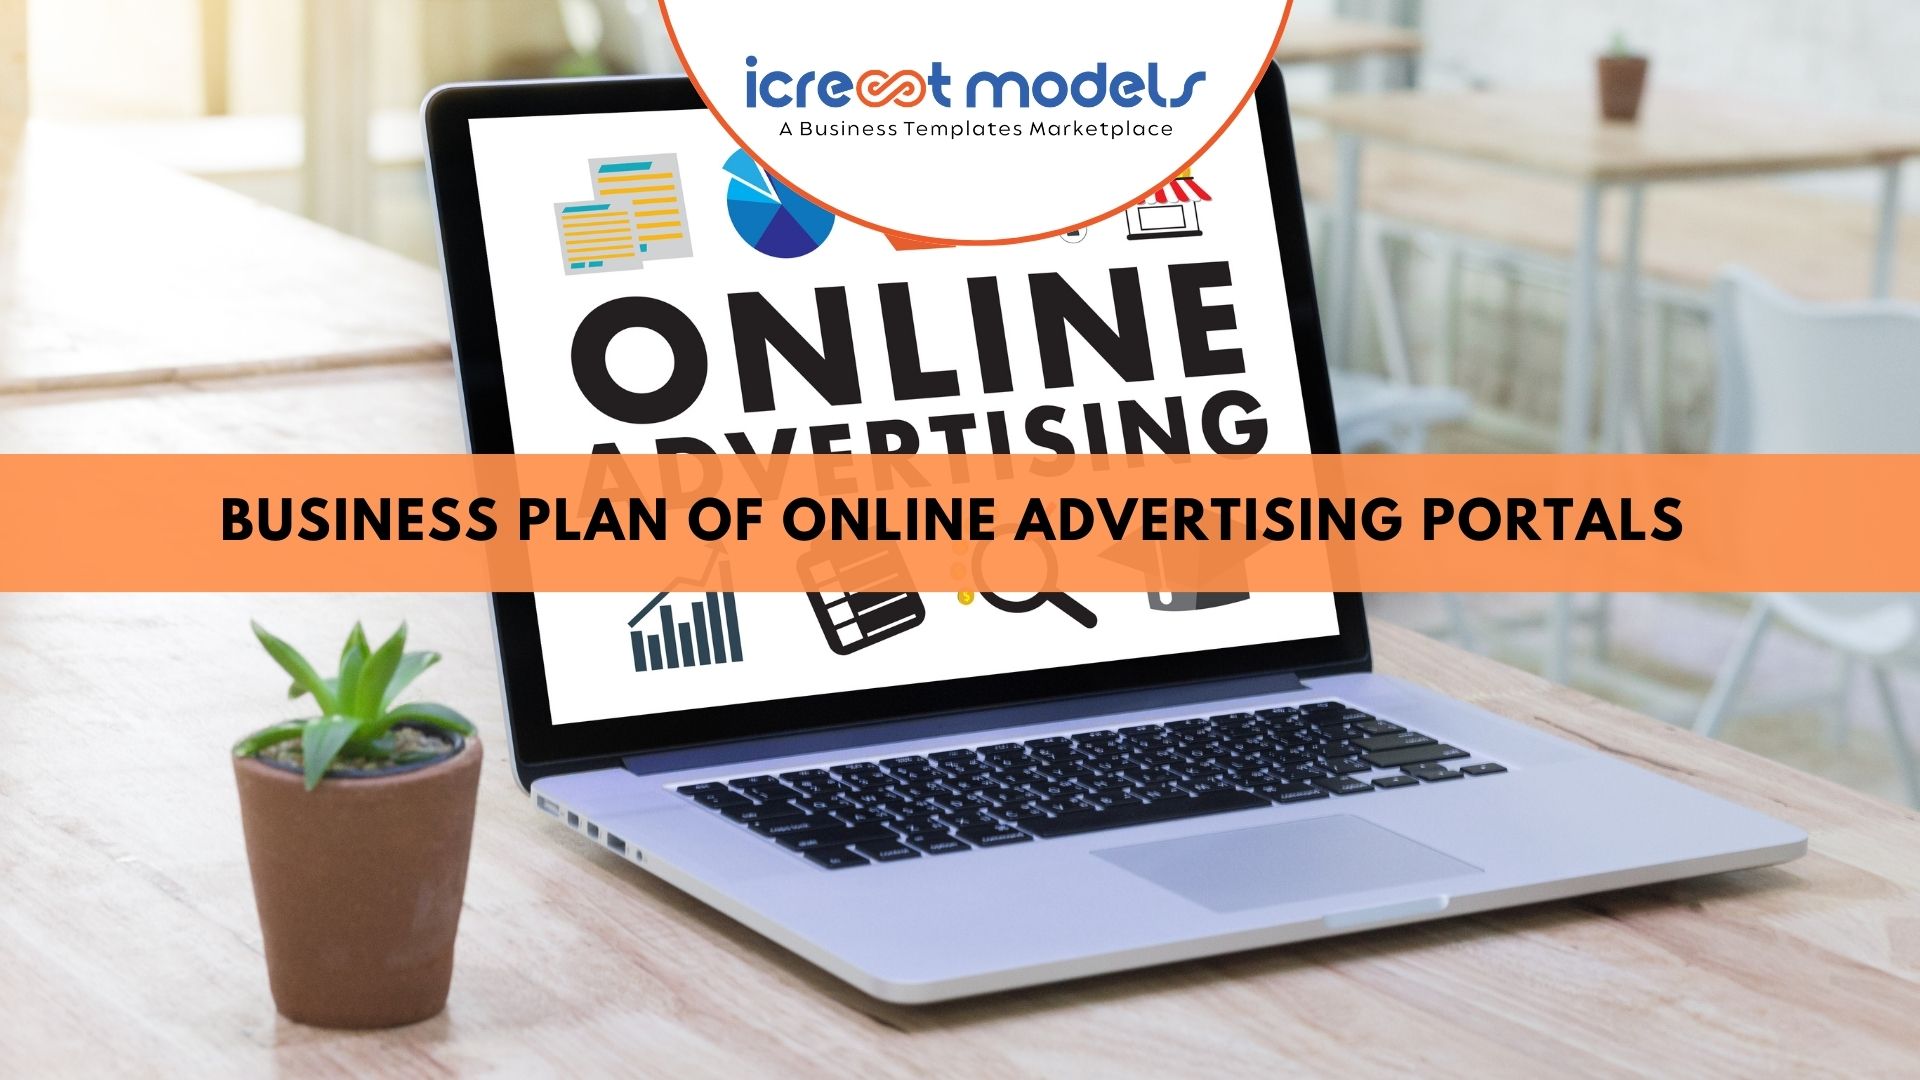 Business Plan of Online Advertising Portals for Add Developers